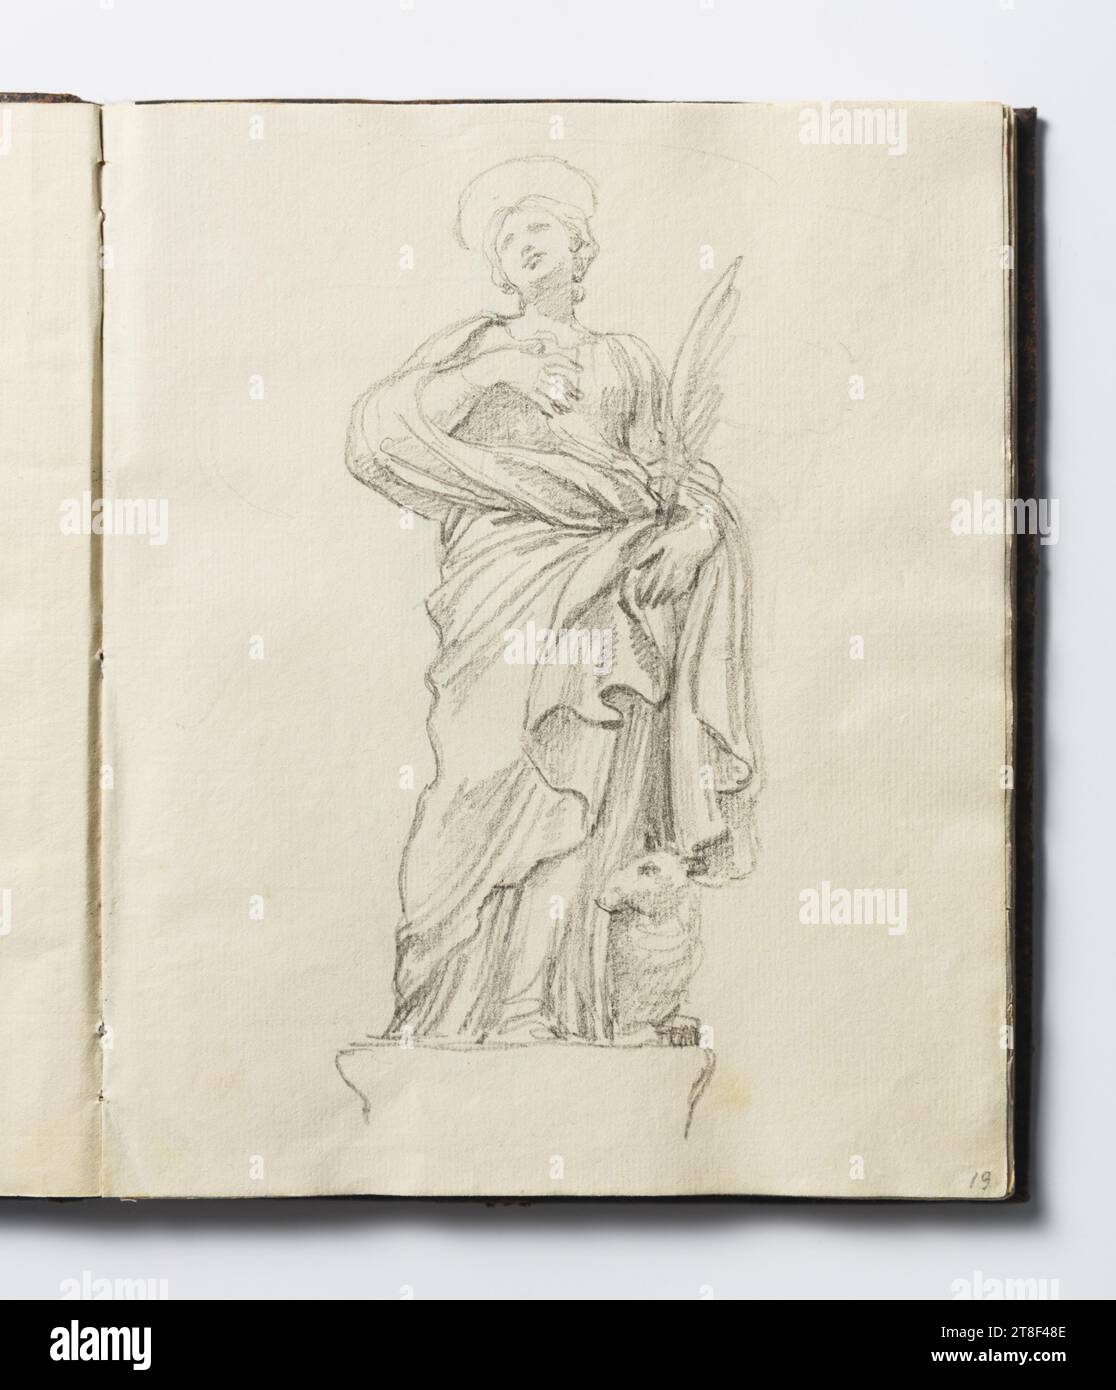 Pocket sketchbook with pencil drawings - William Makepeace